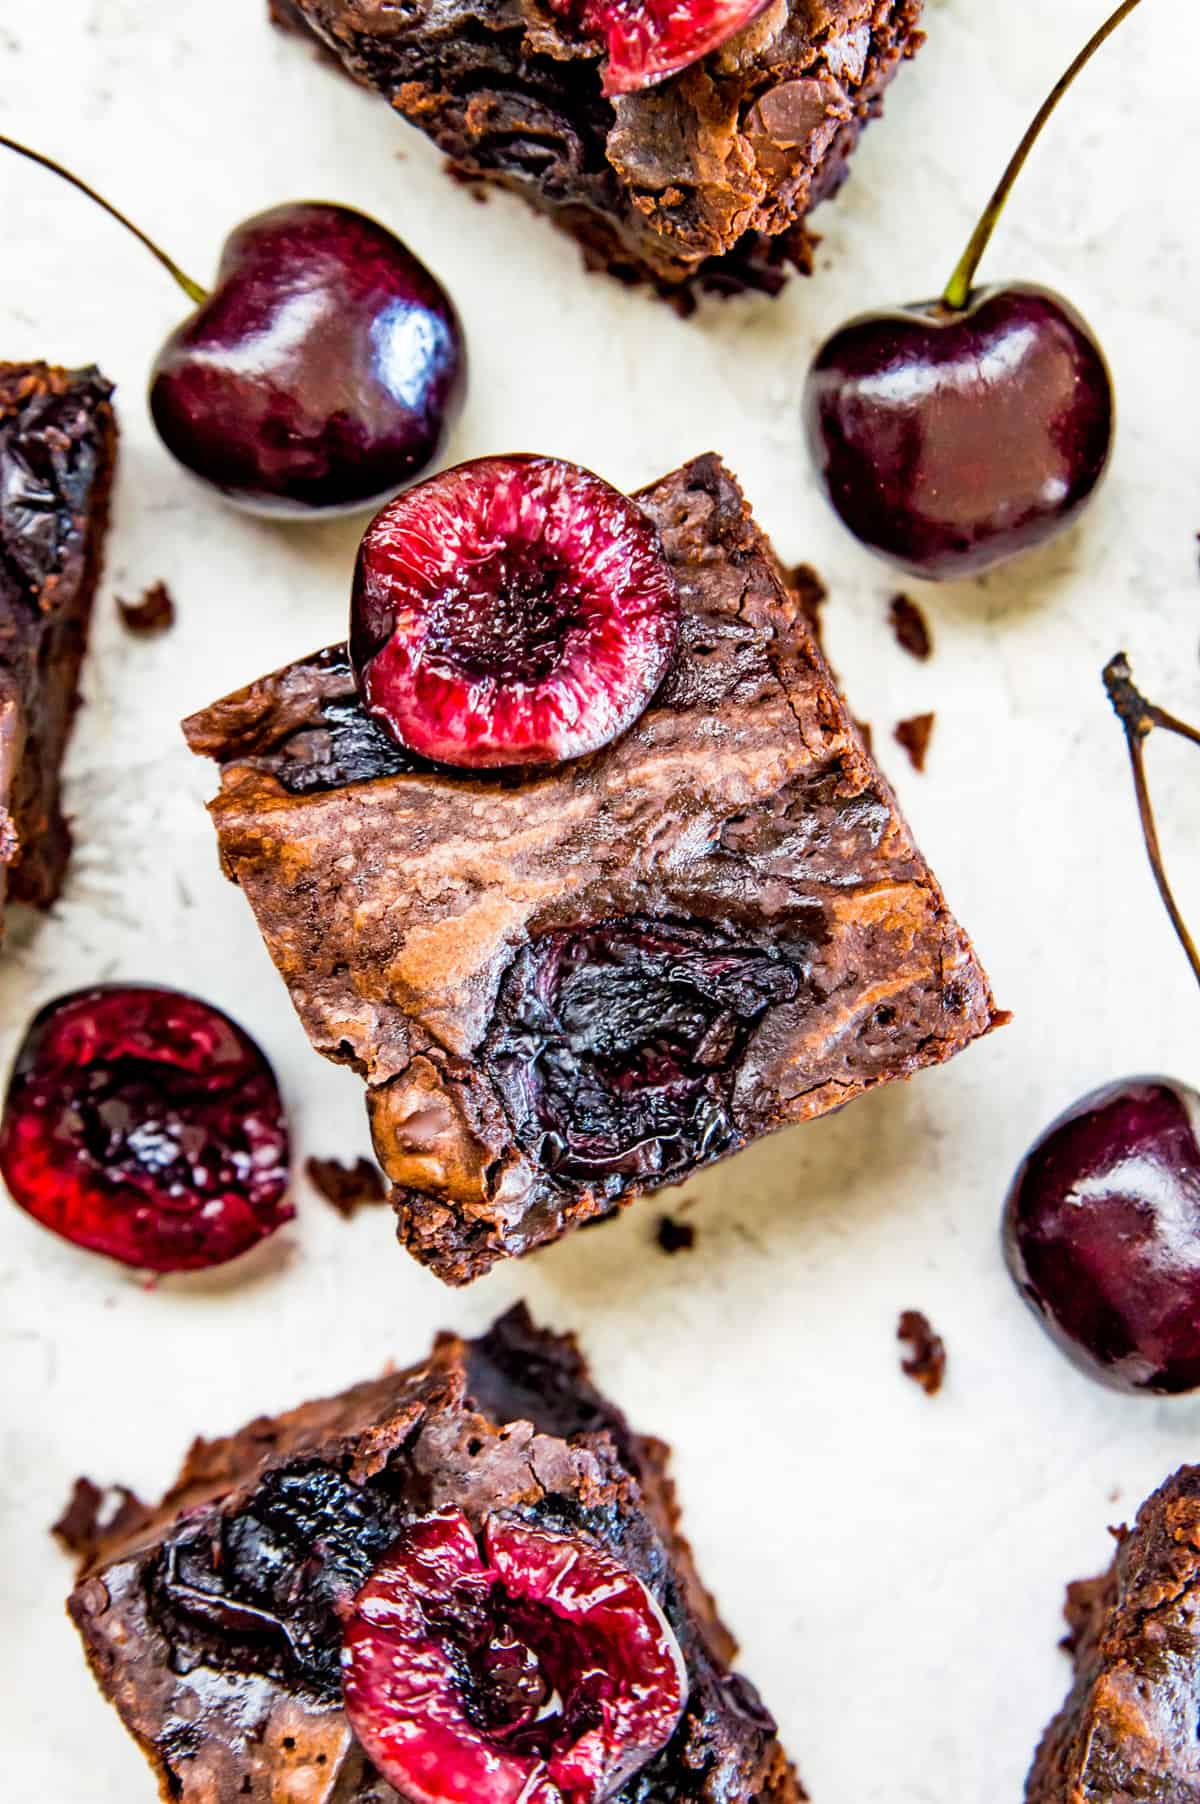 Cut up cherry brownies with fresh cherries on top surrounded by fresh cherries.